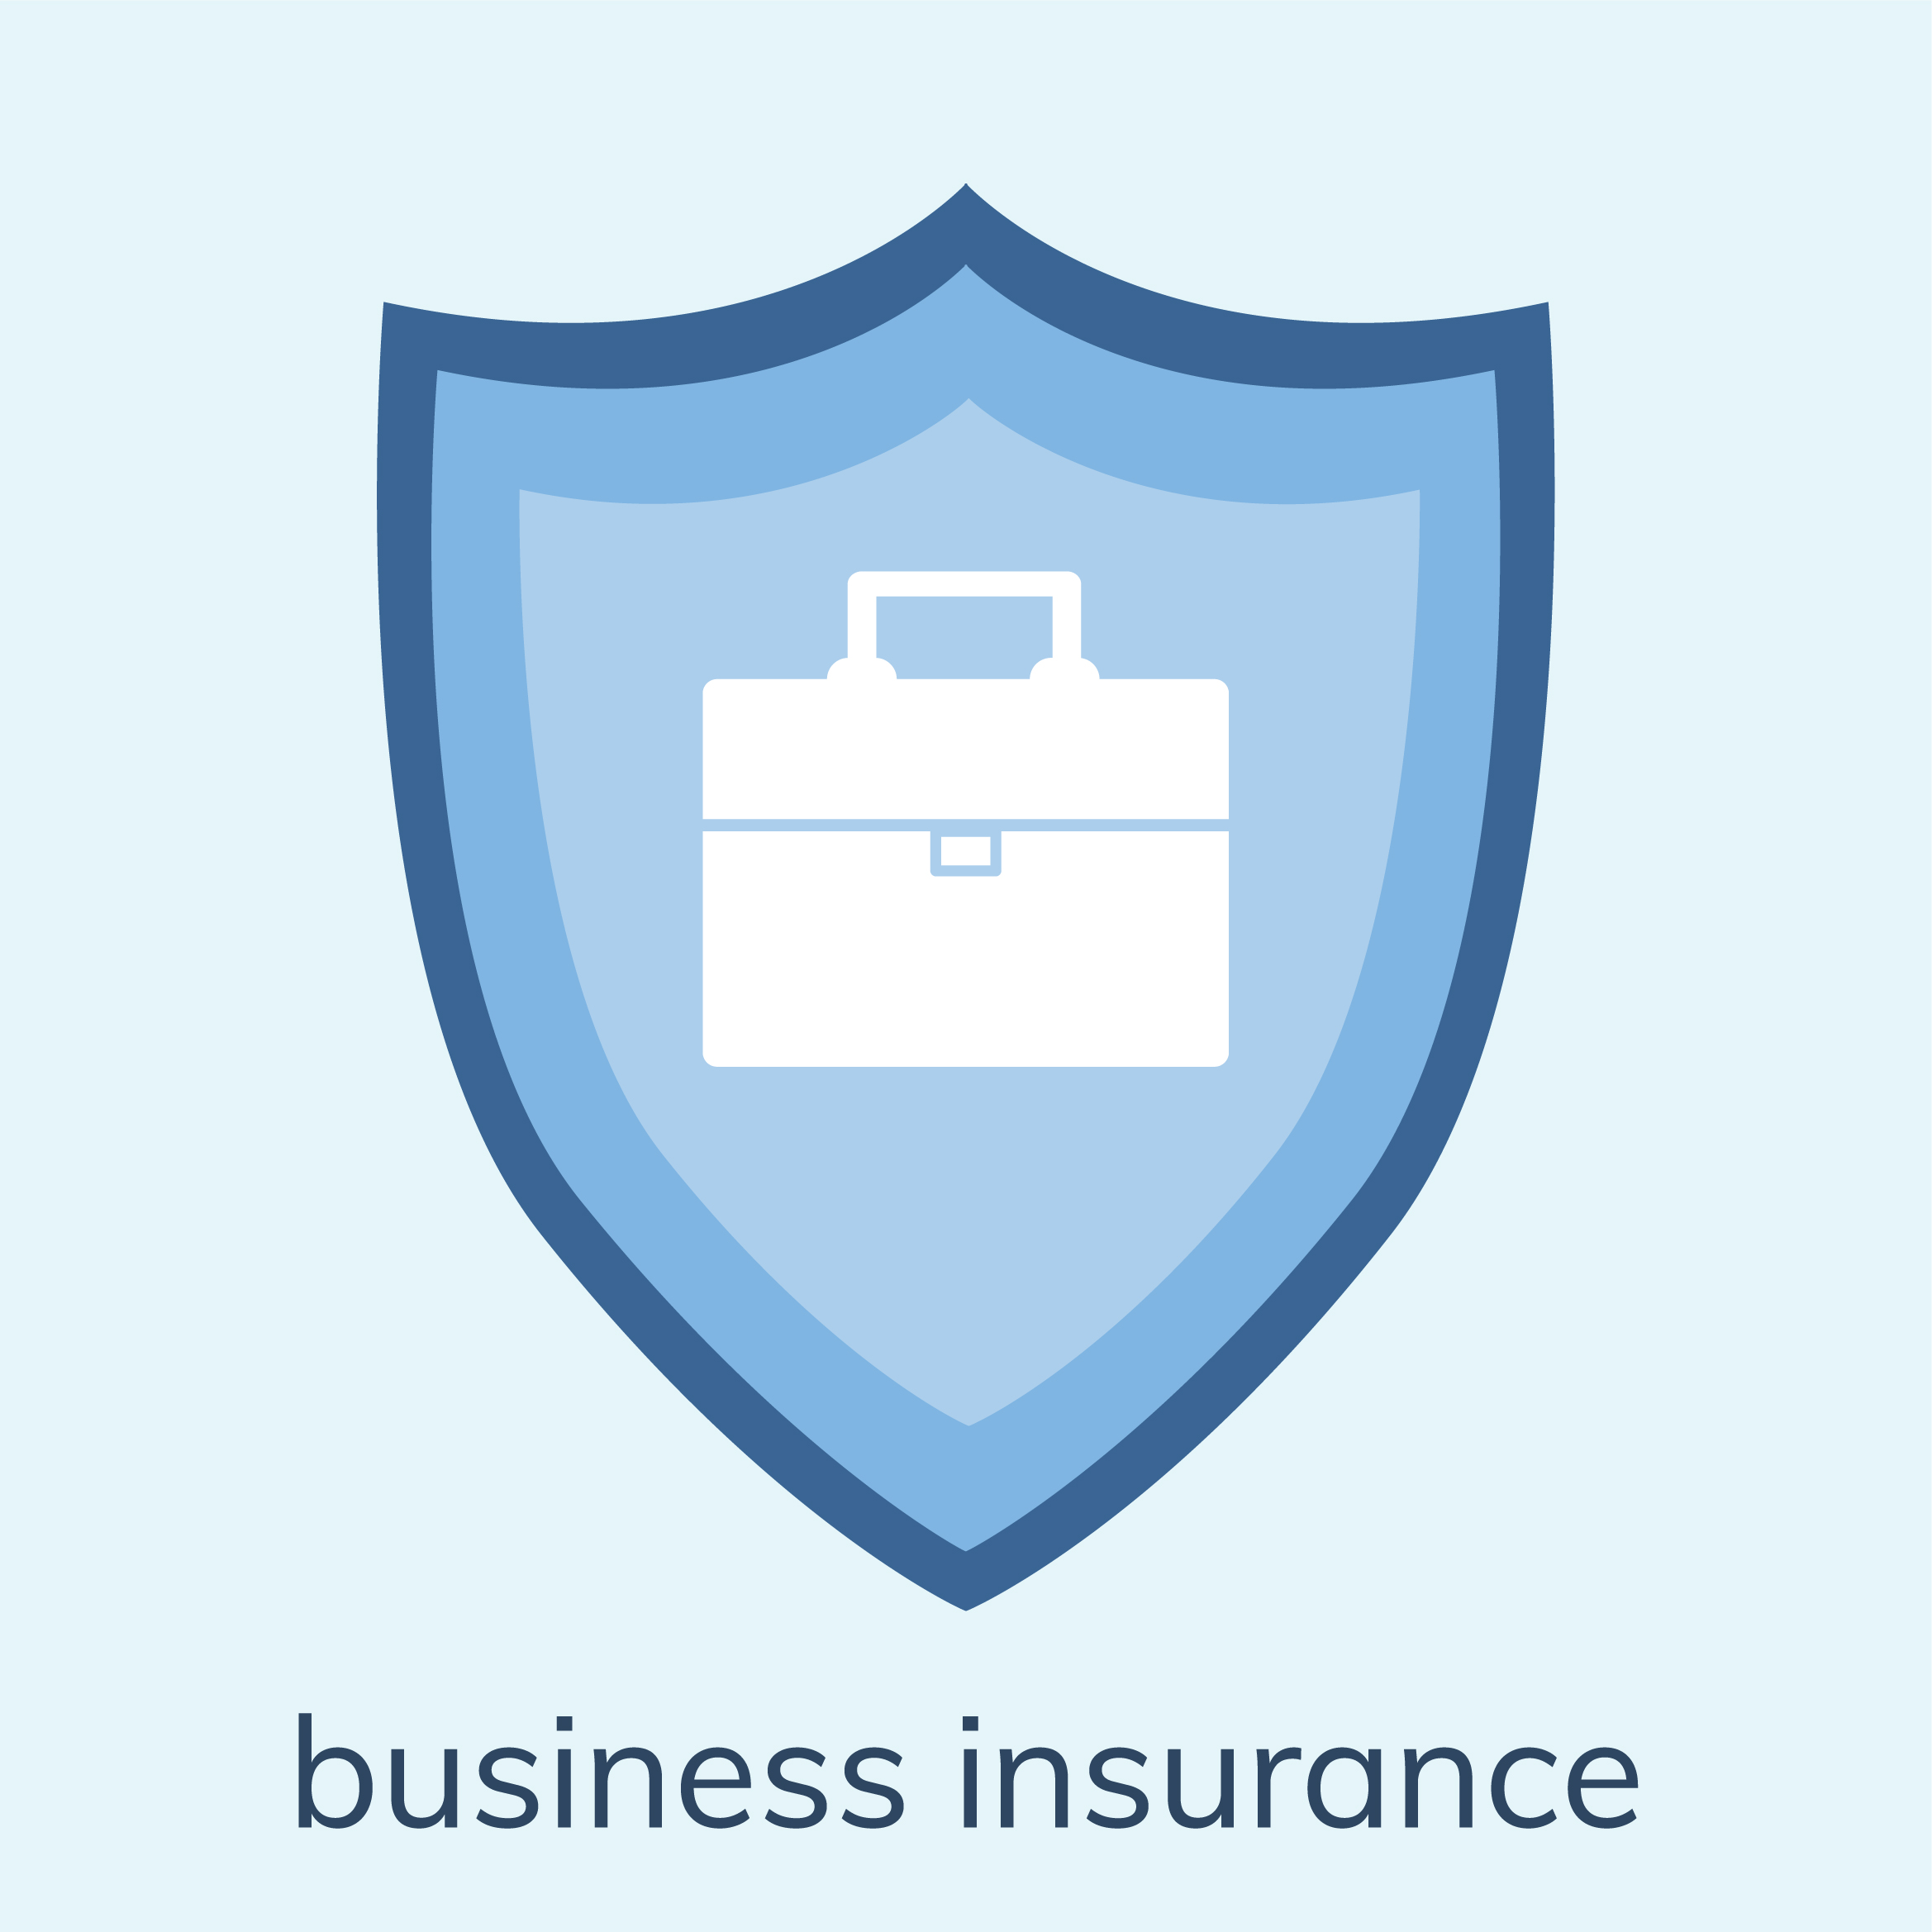 Illustration a business insurance icon - Download Free Vectors, Clipart ...